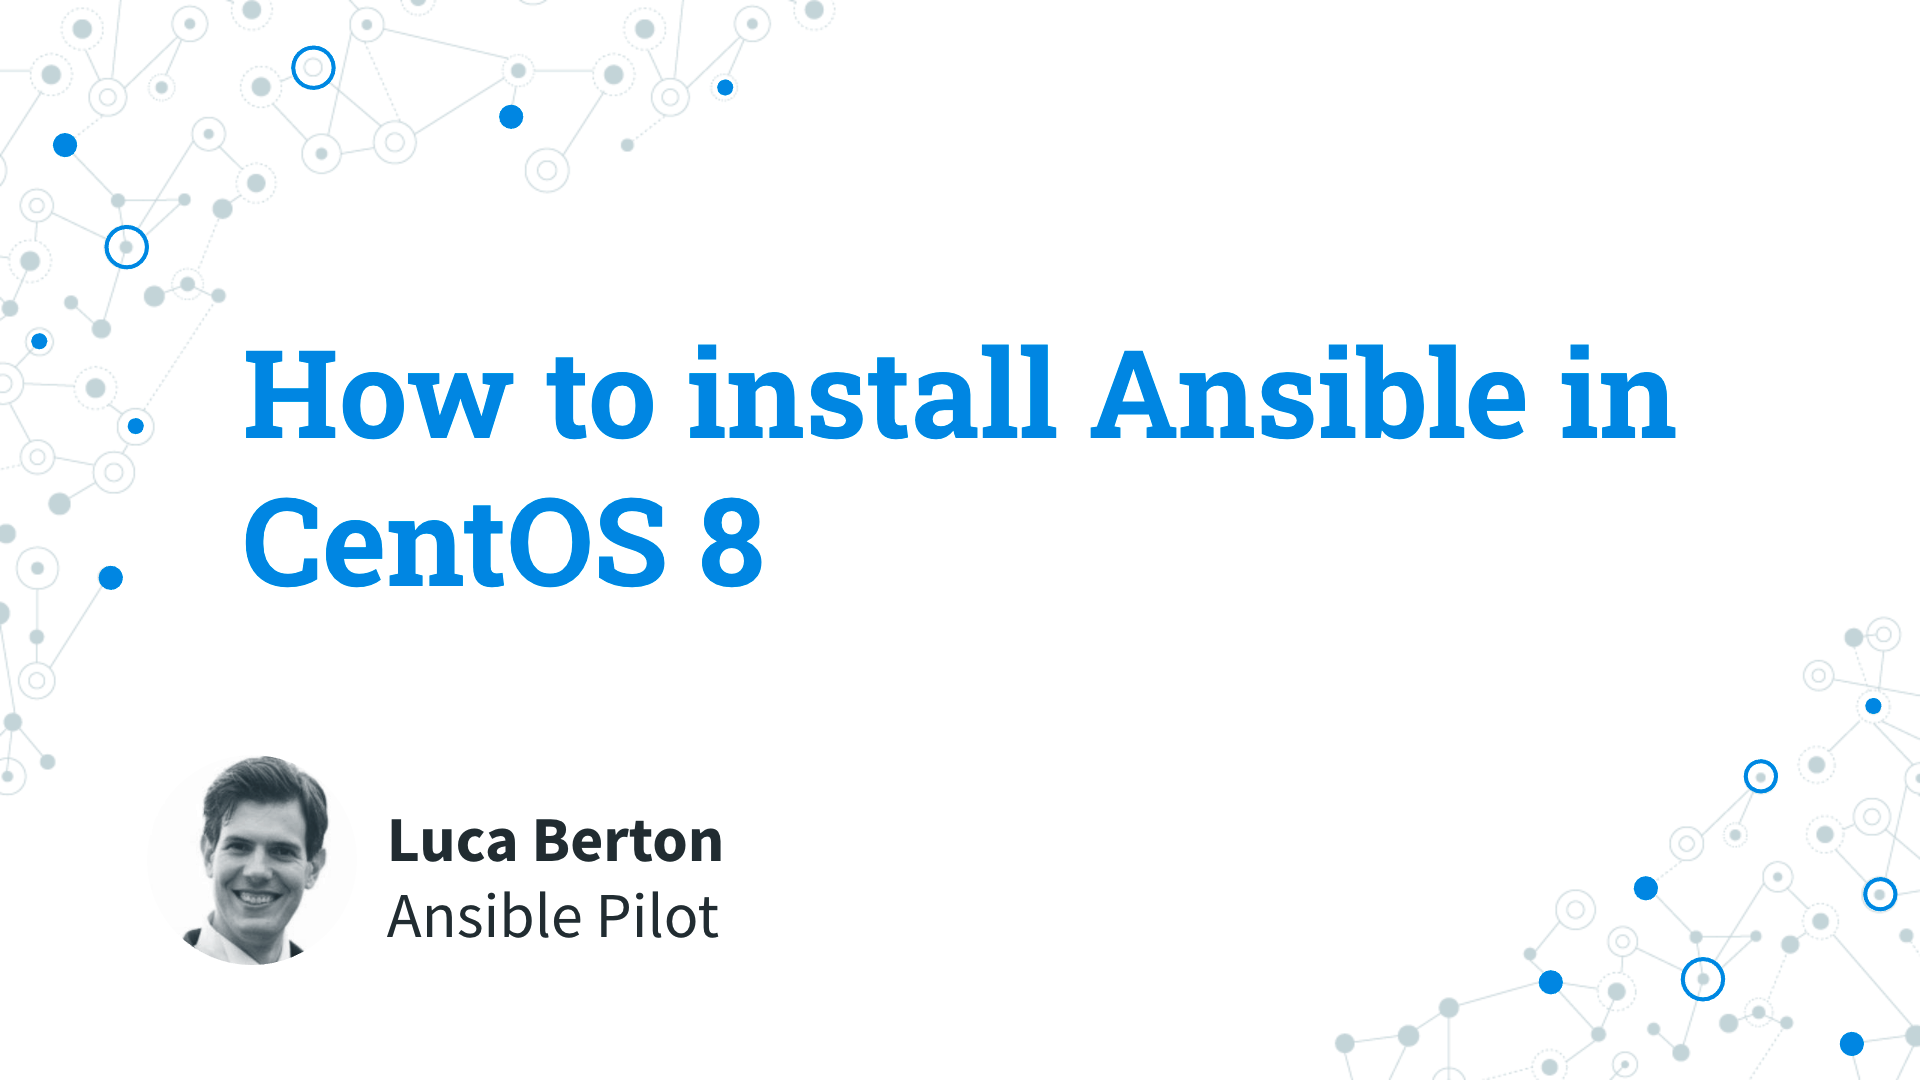 How to install Ansible in CentOS 8 - Ansible install